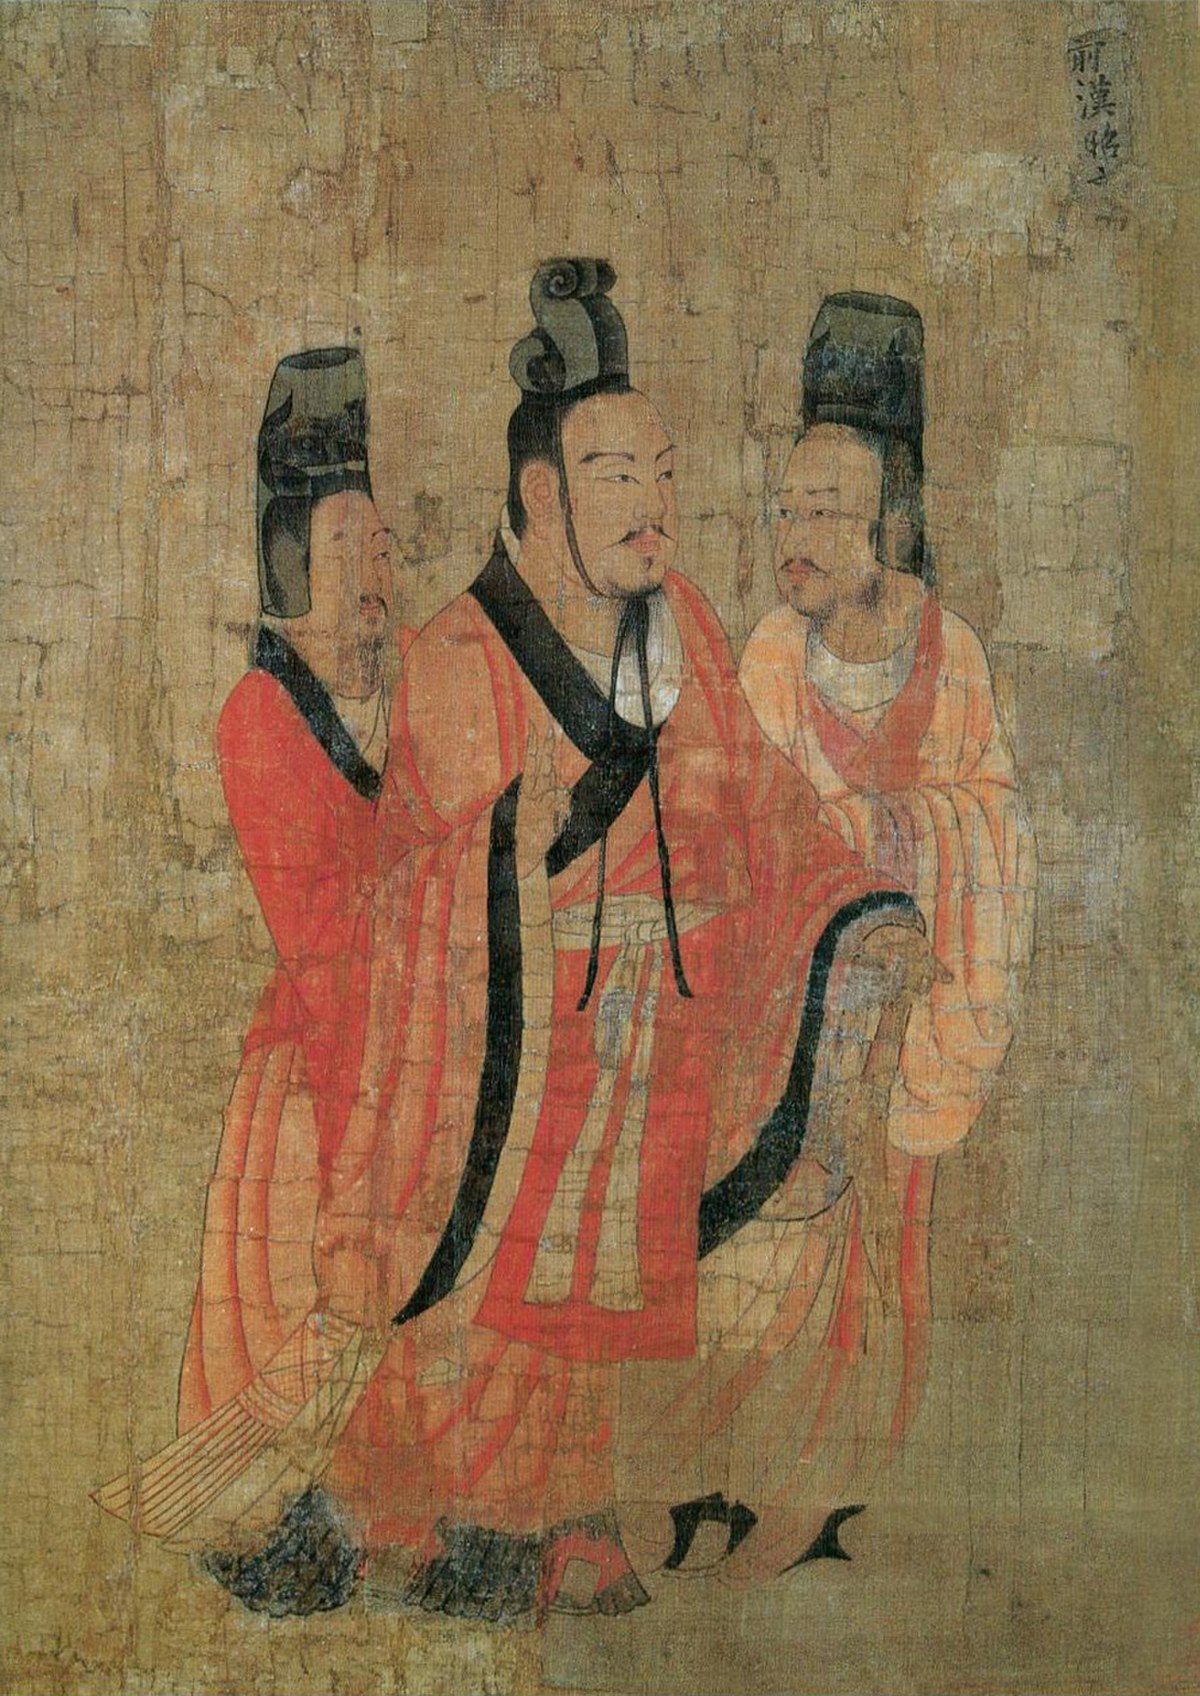 Reign of Zhao of Han